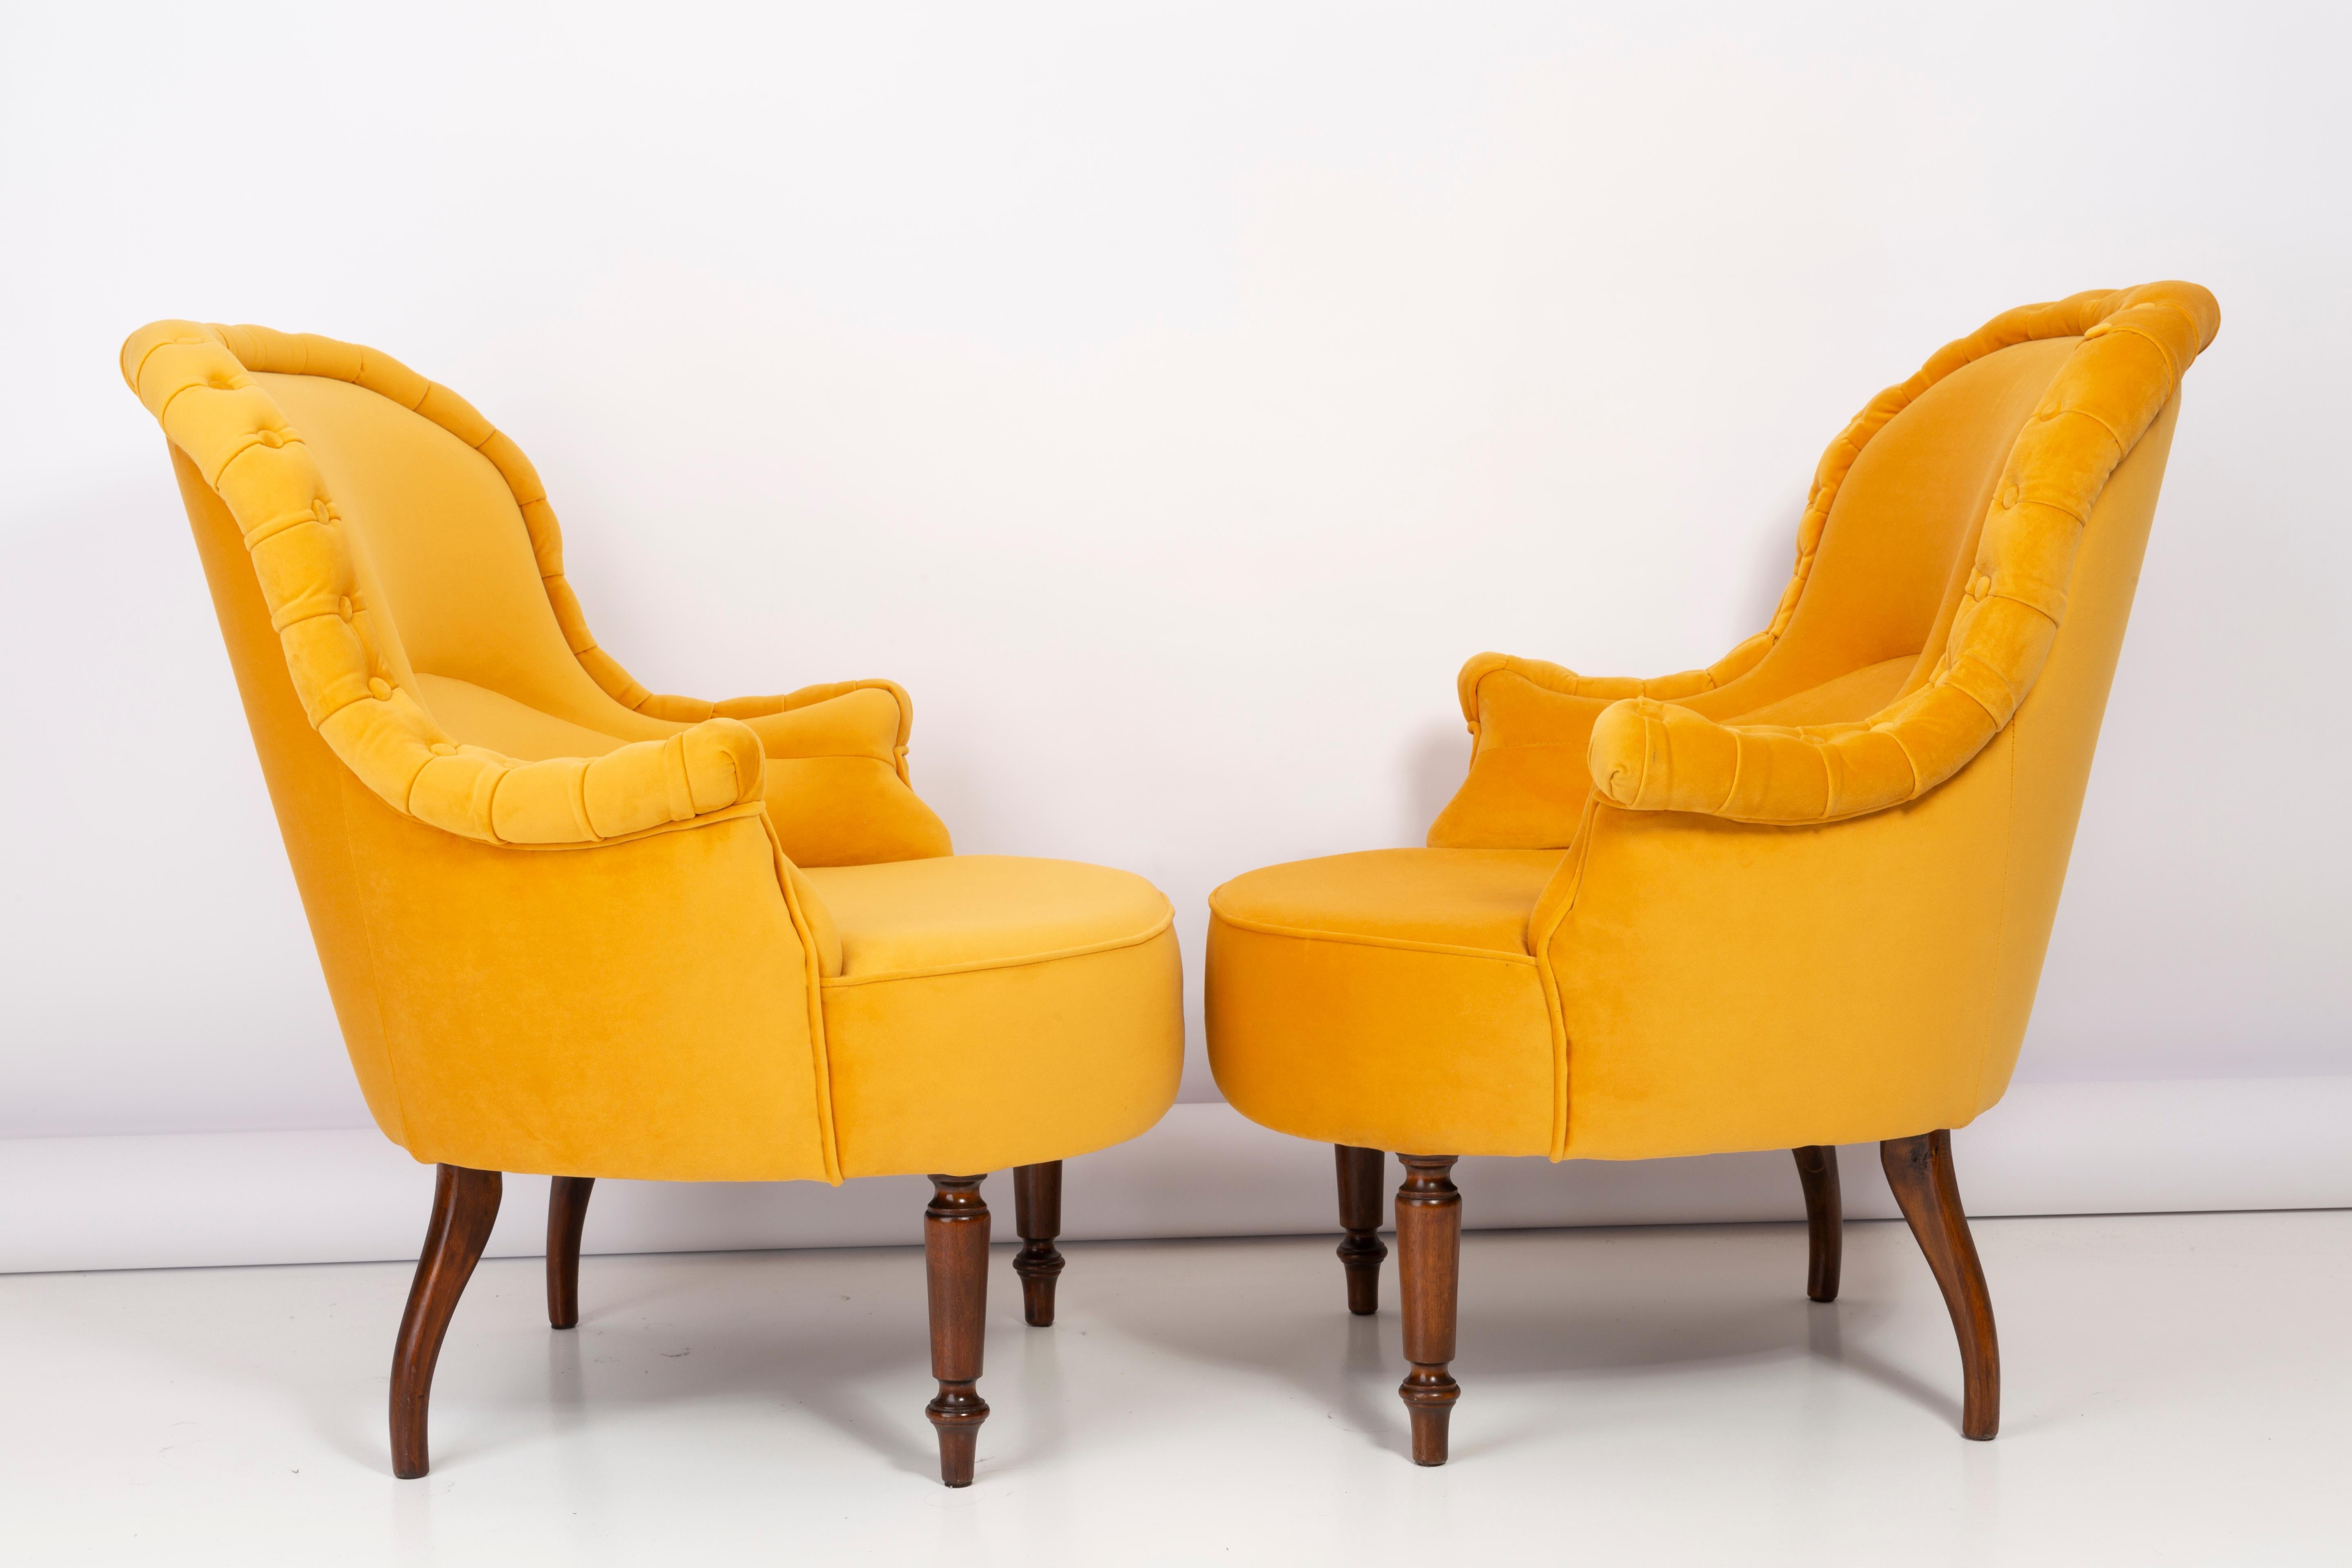 Hand-Crafted Pair of Unique Yellow Mustard Armchairs, 1930s, Germany For Sale